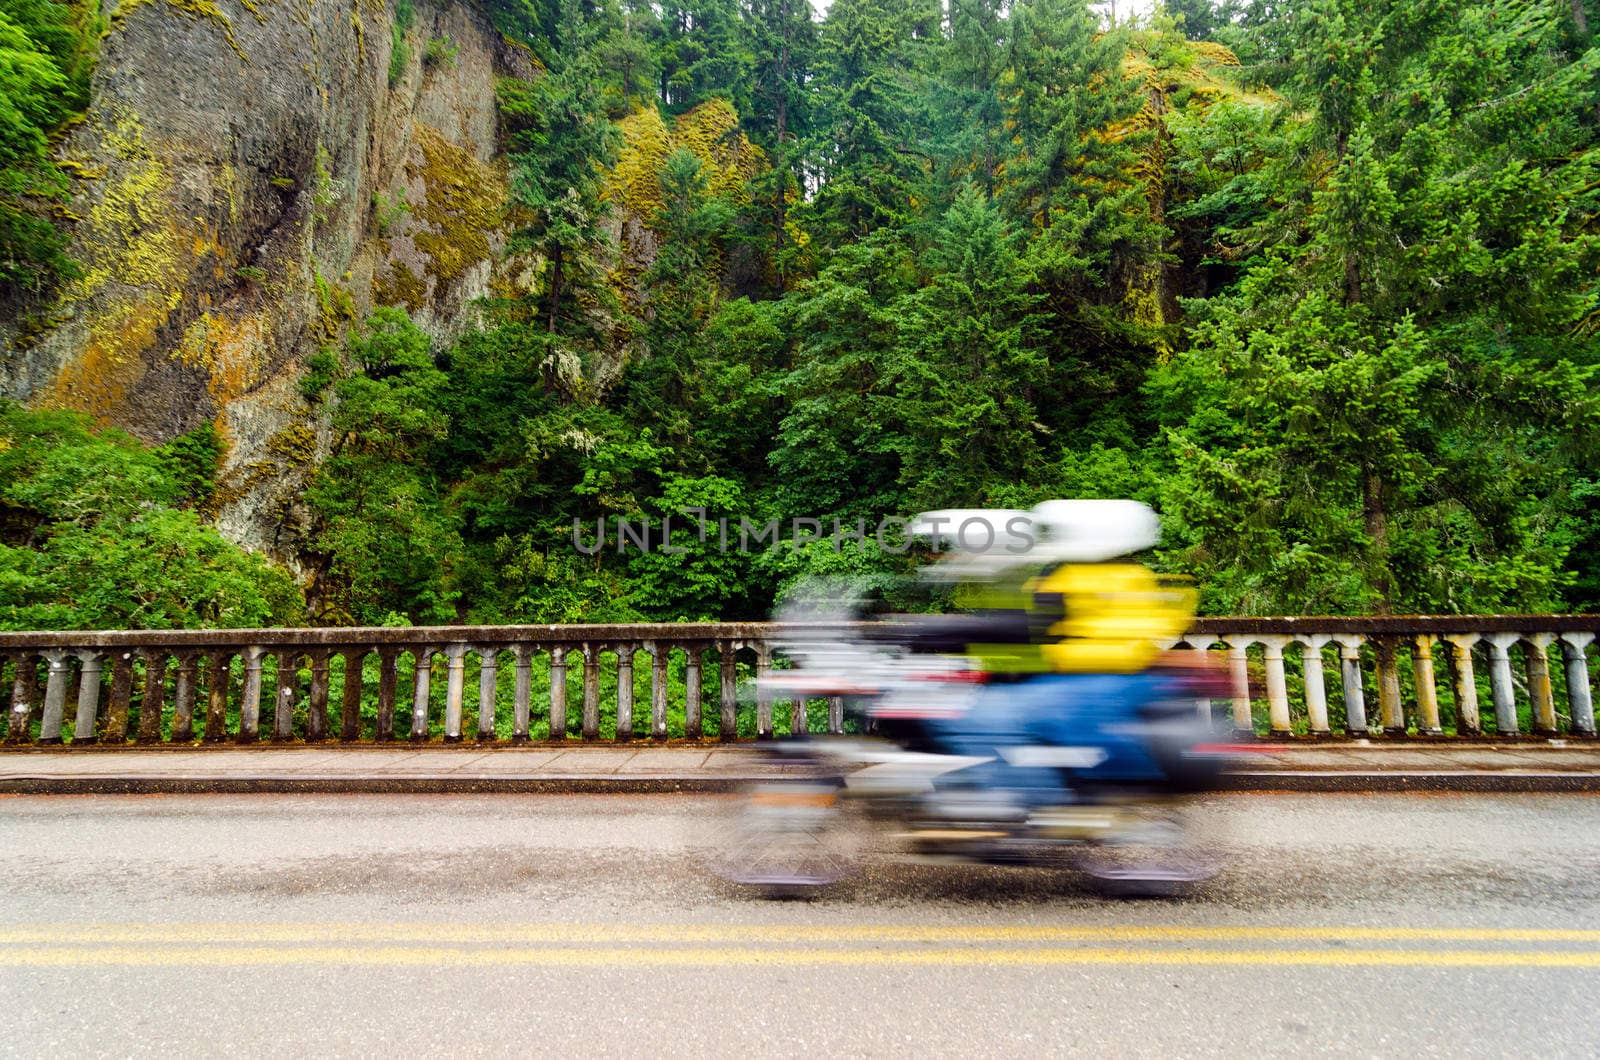 A motorycle passing by on the scenic highway in the Columbia River Gorge in Oregon